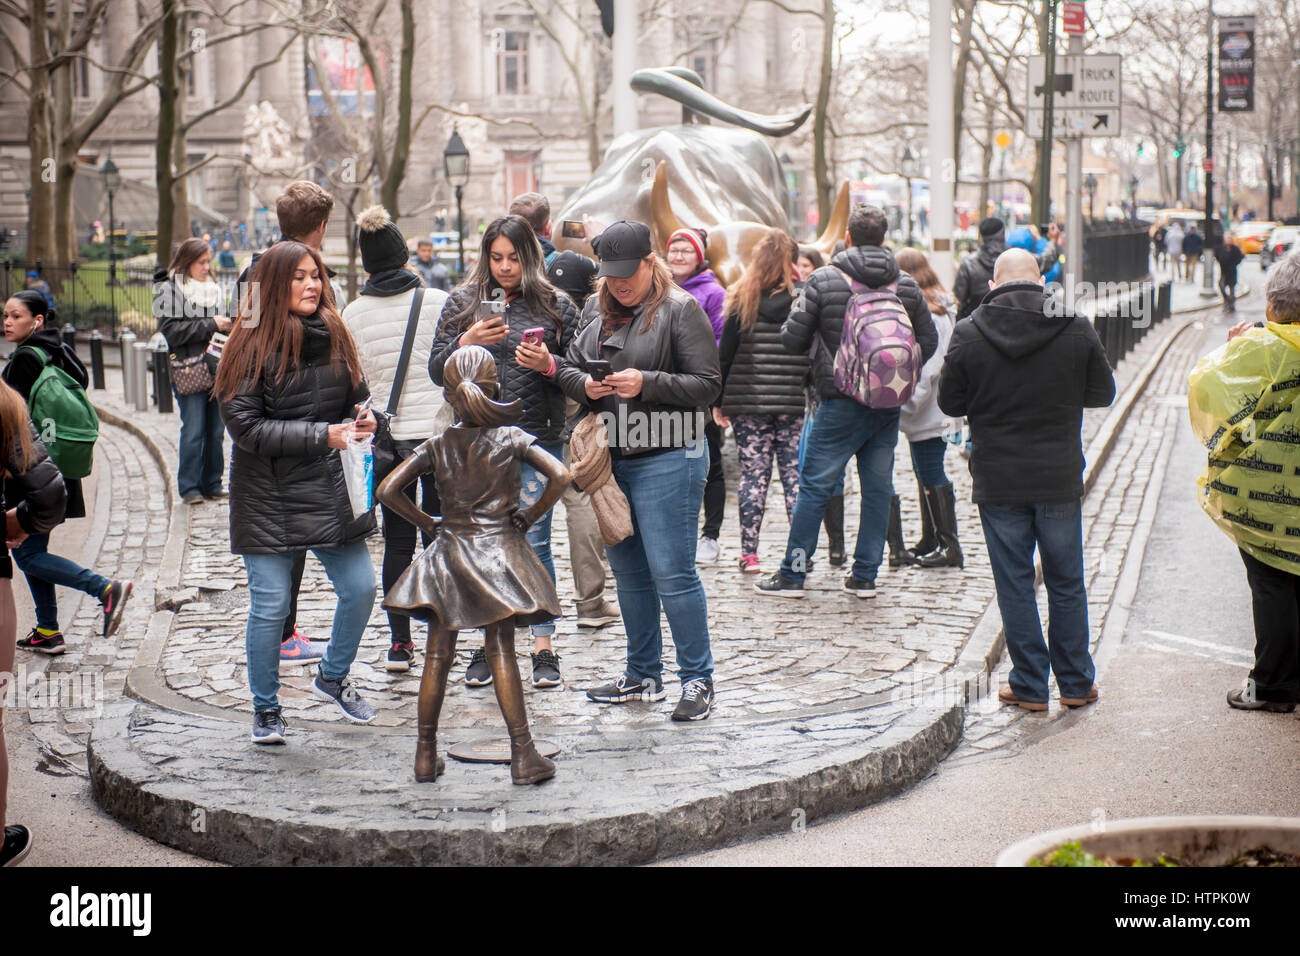 The bronze statue, "The Fearless Girl" by the artist Kristen Visbal attracted attention at Bowling Green Park in New York on its first day, Tuesday, March 7, 2017. Installed just prior to International Women's Day, it is a campaign by State Street Global Advisors (SSGA) to educate the companies that have women in executive positions perform better and to call on the 3500 companies that collectively have more than $30 trillion in market capitalization to increase the amount of women on their boards. SSGA has the SPDR®SSGA Gender Diversity Index ETF trading under the moniker "SHE". (© Richard B. Stock Photo